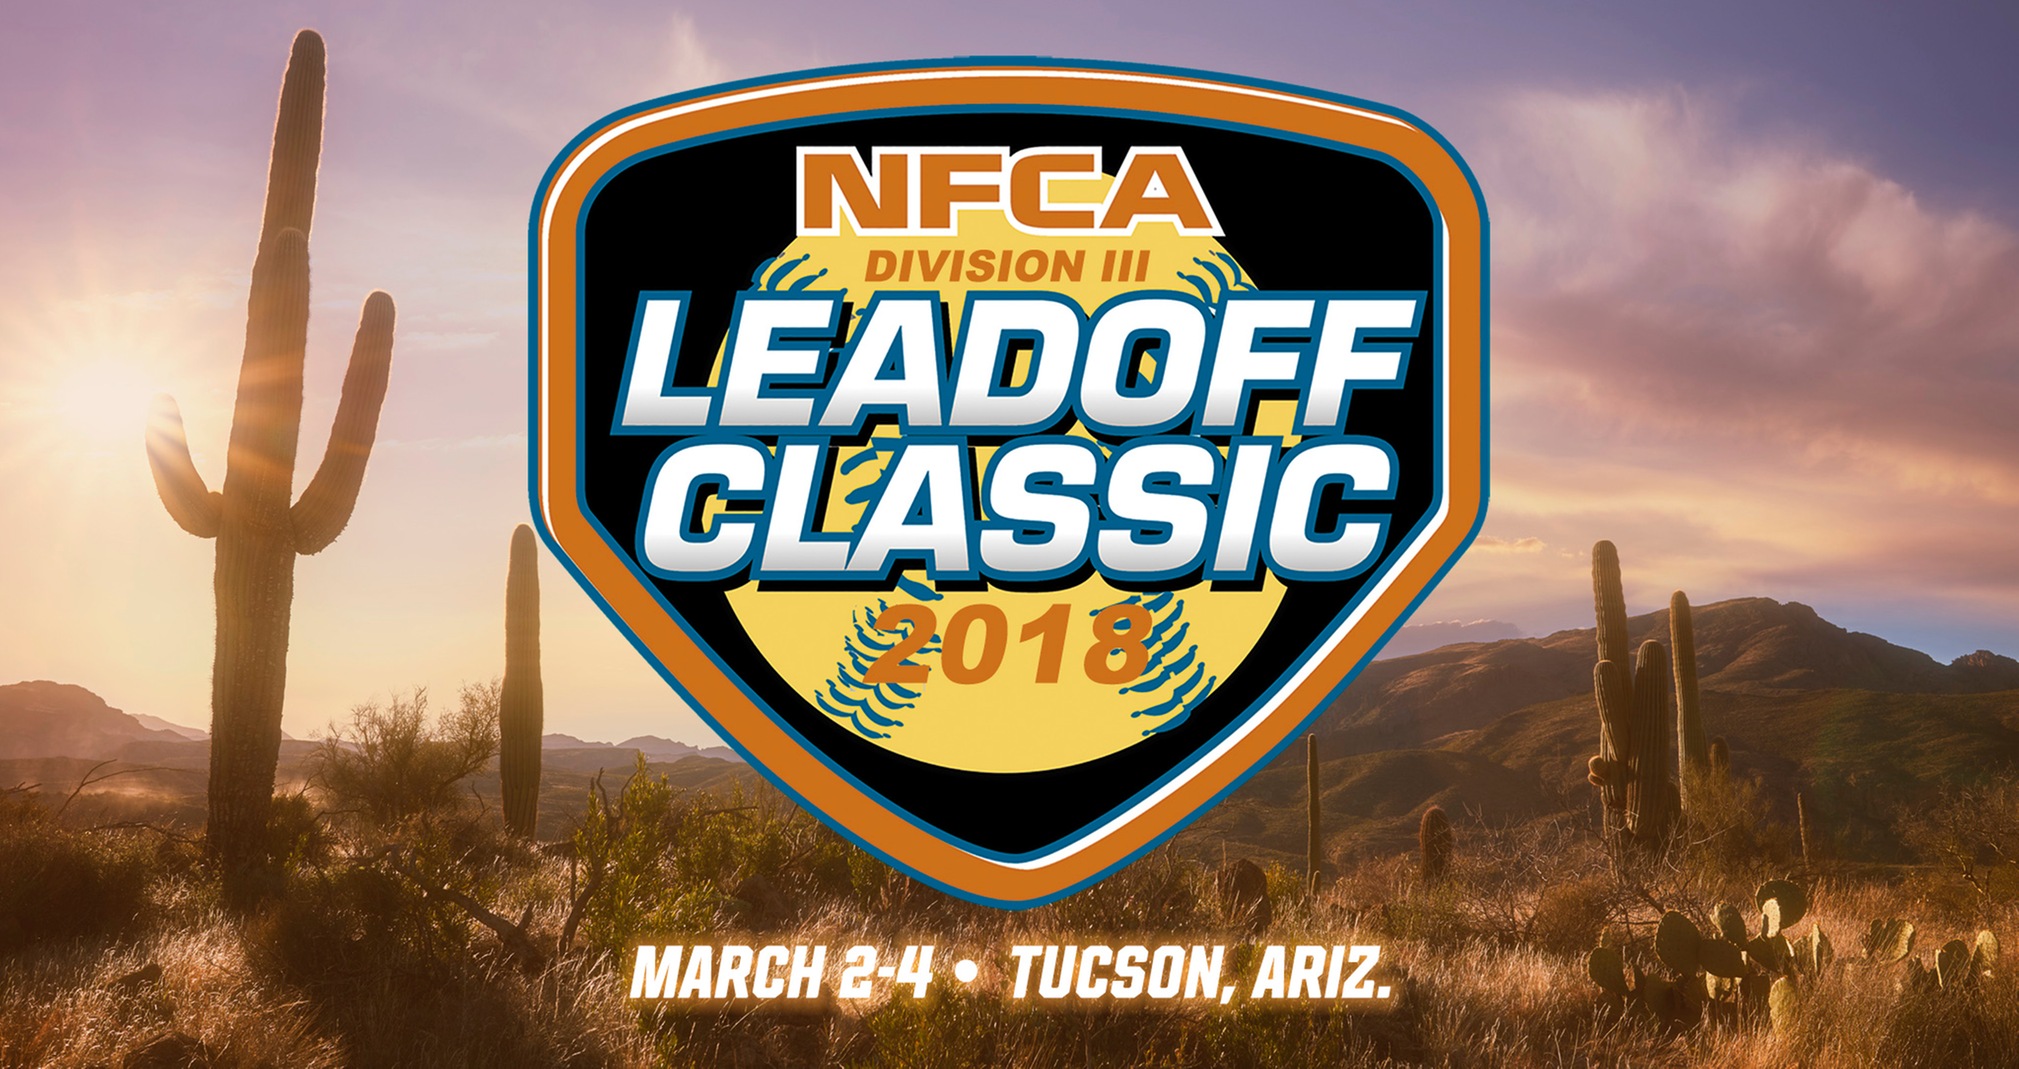 Titans To Be Challenged At NFCA Leadoff Classic